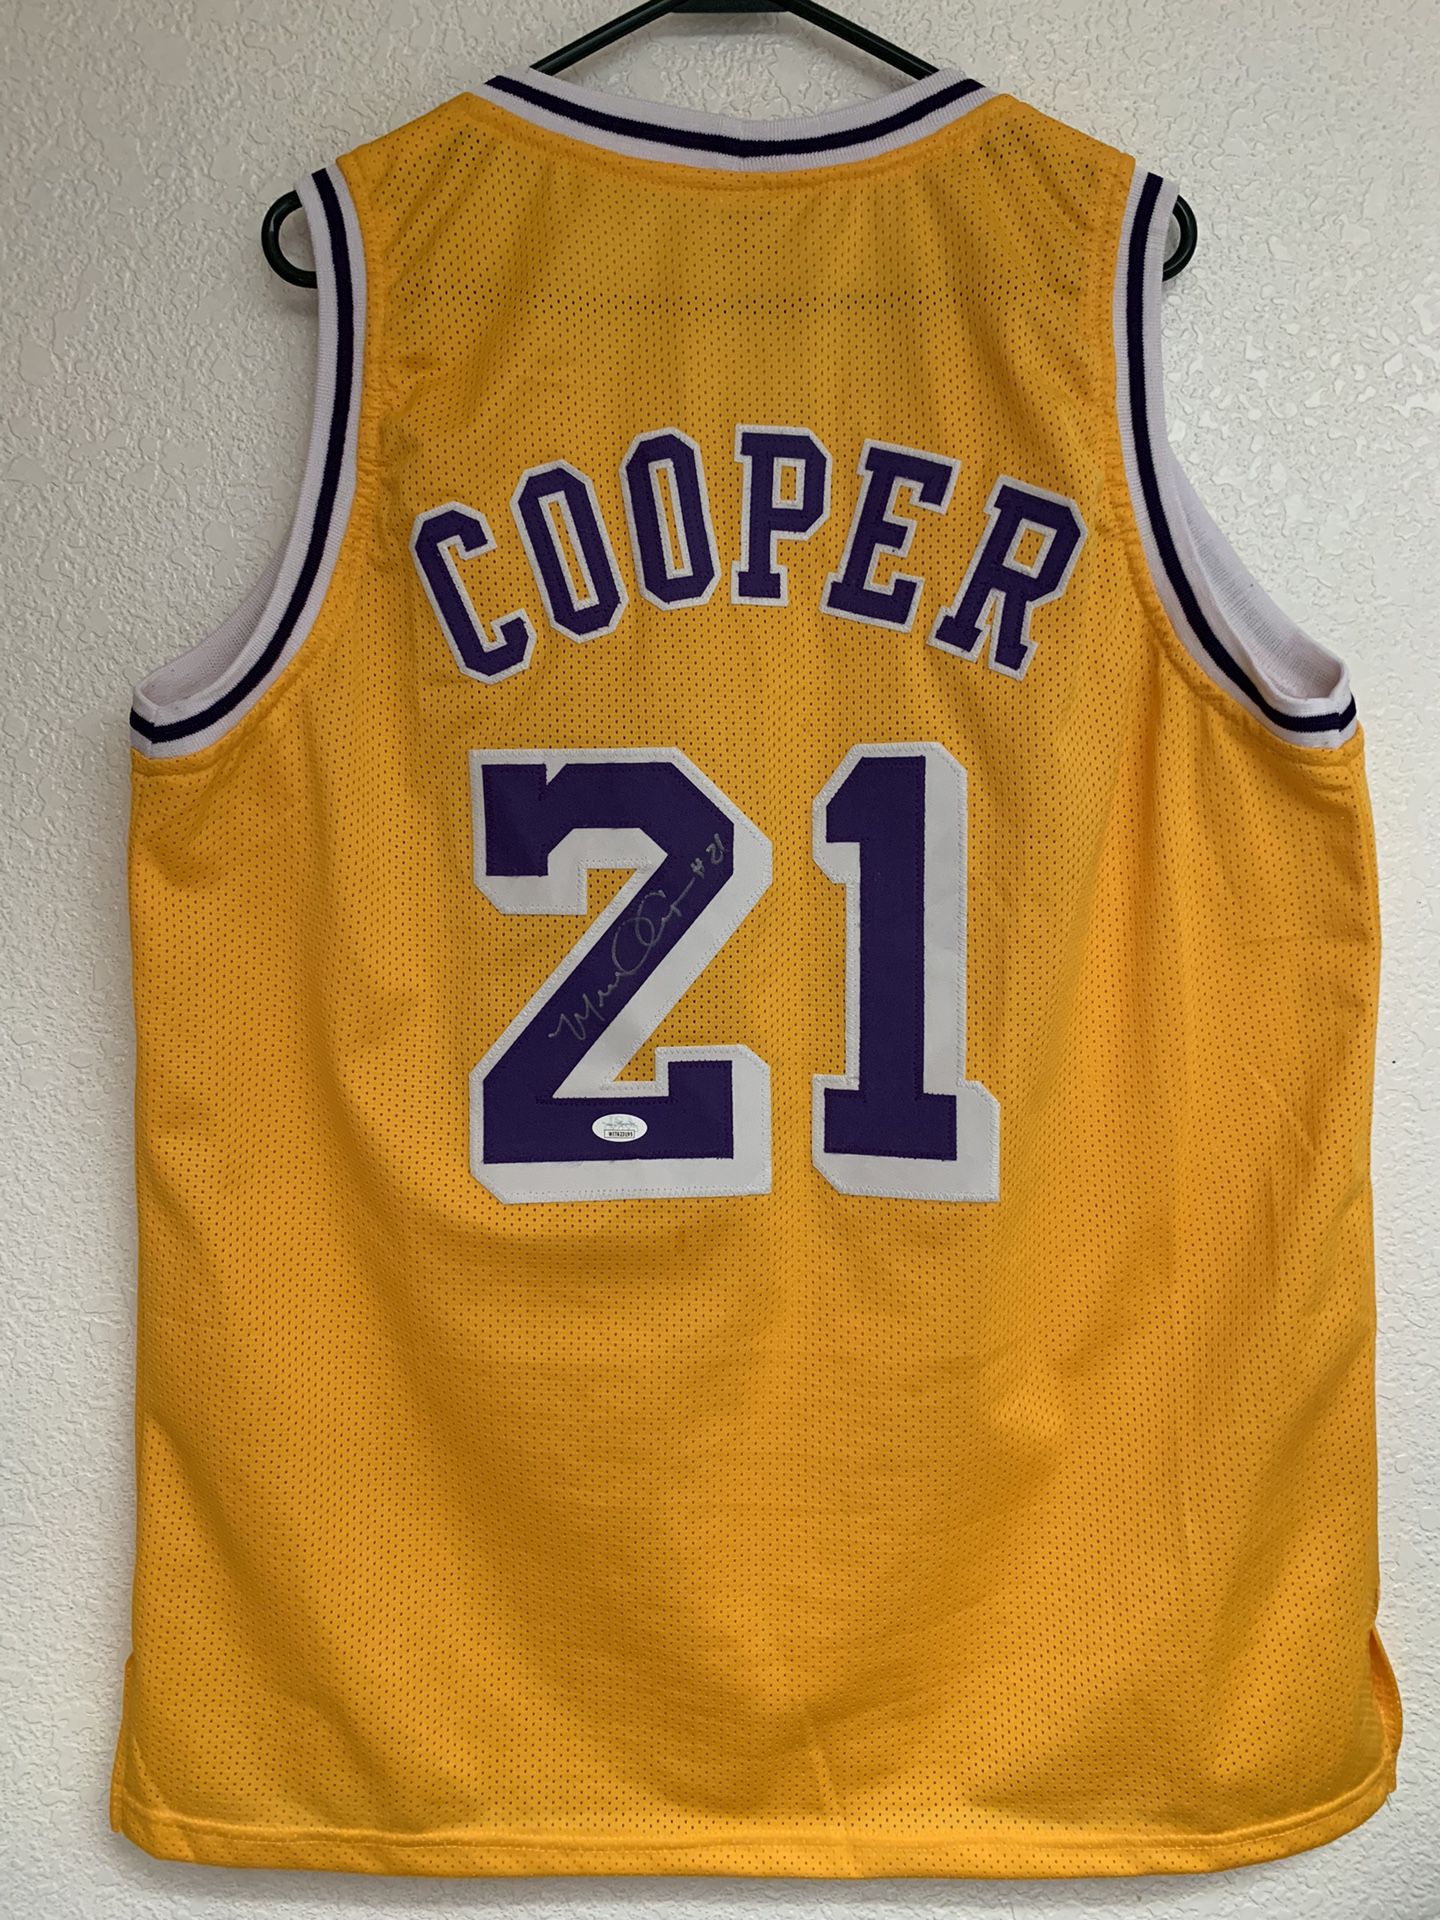 Michael Cooper Lakers Autographed Jersey